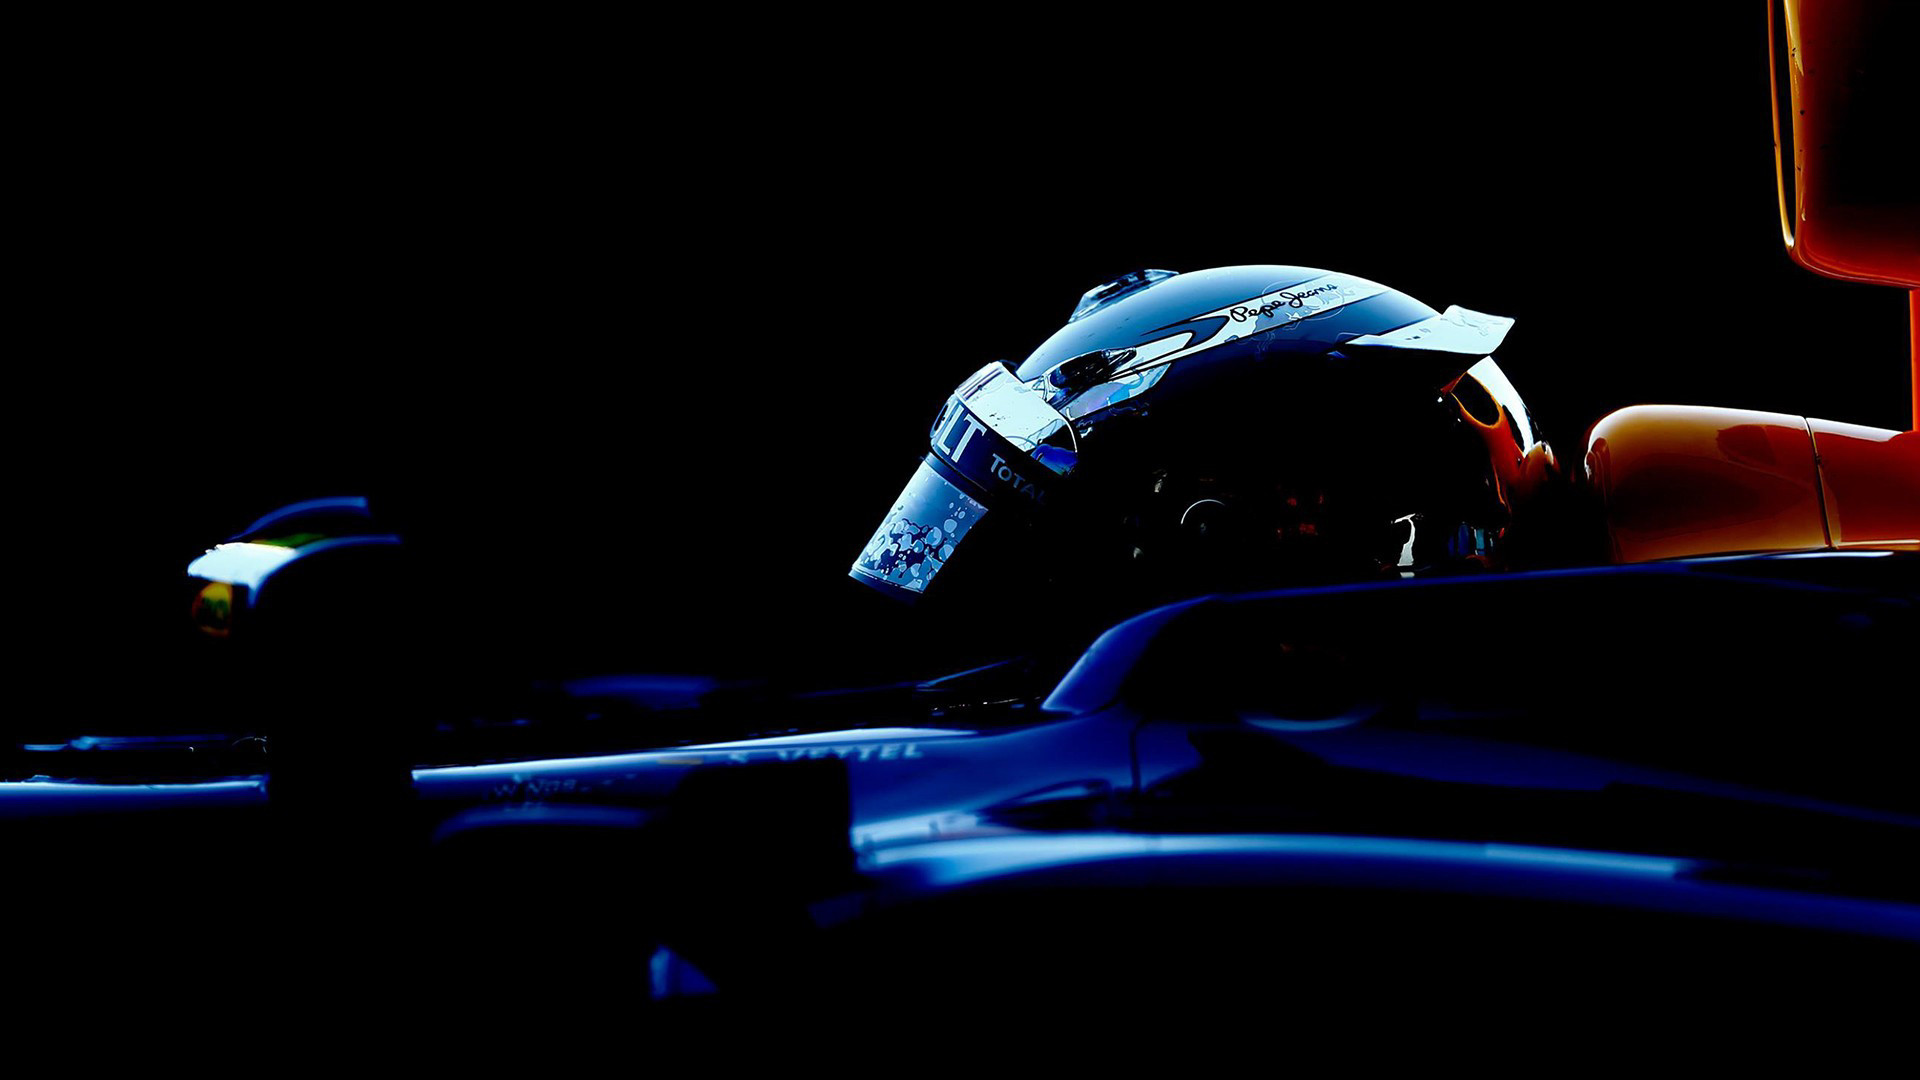 1920x1080 My collection of F1 Wallpapers 1920 x 1080